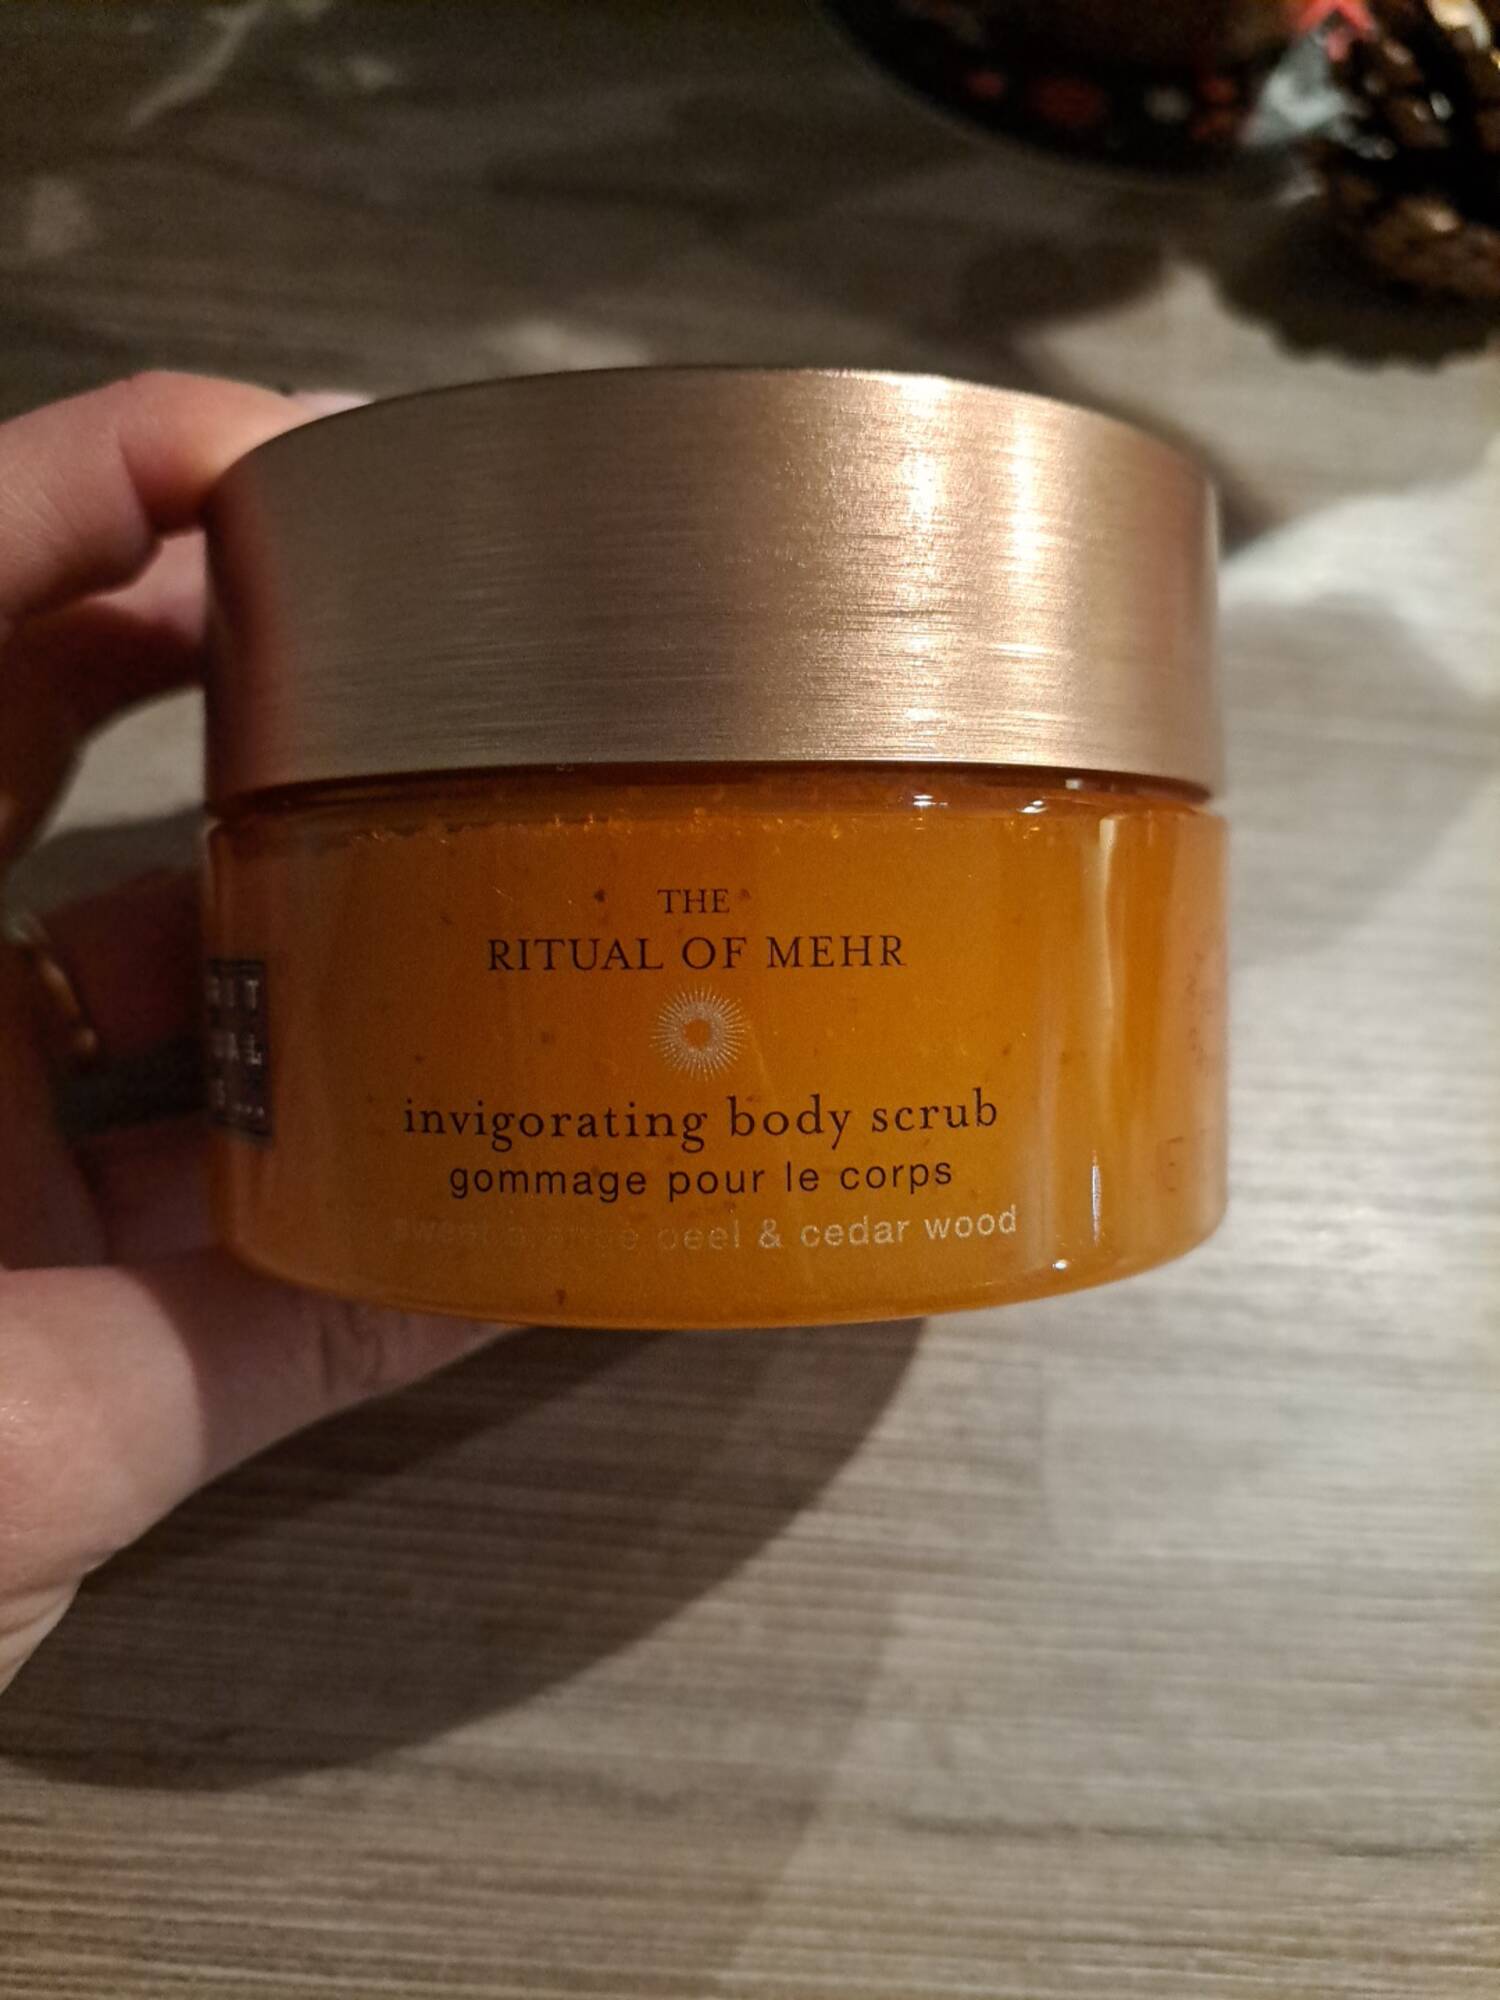 RITUALS - The ritual of mehr - Gommage pour le corps